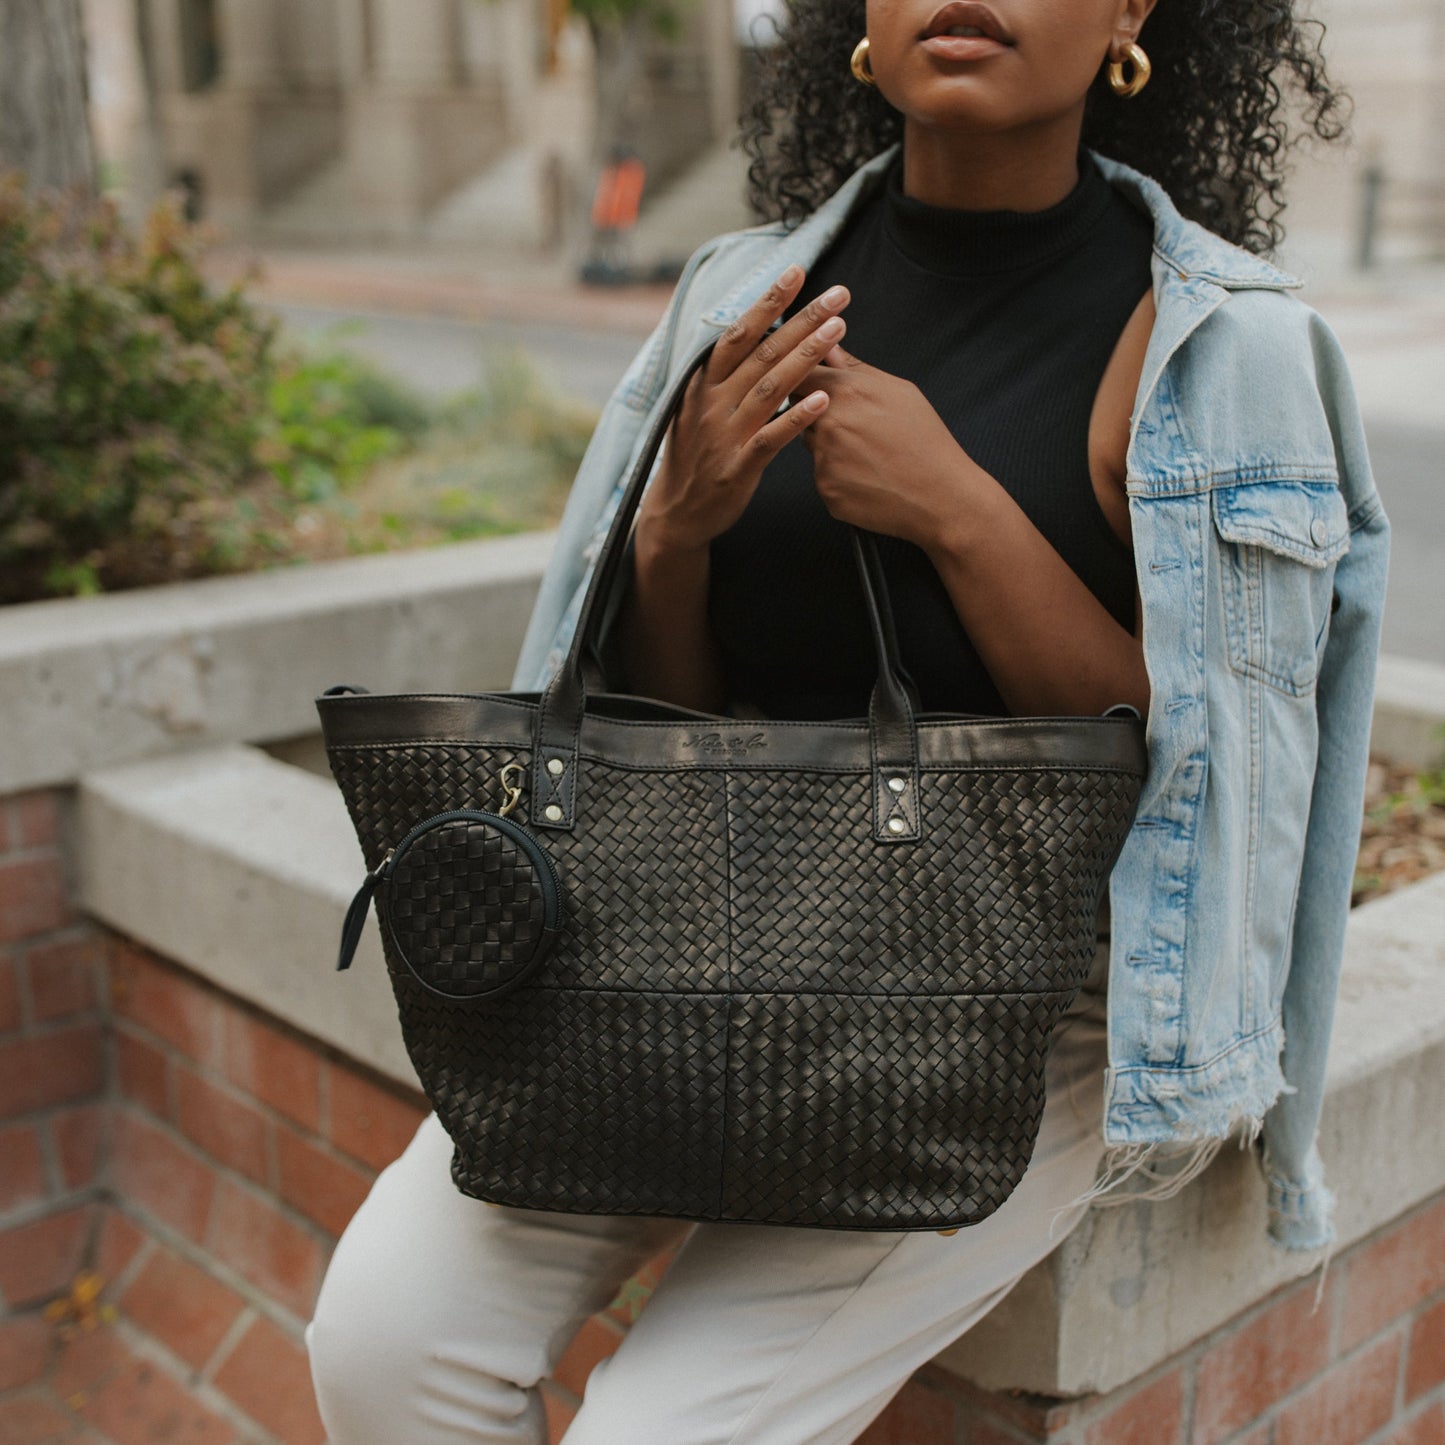 Woven Leather Tote